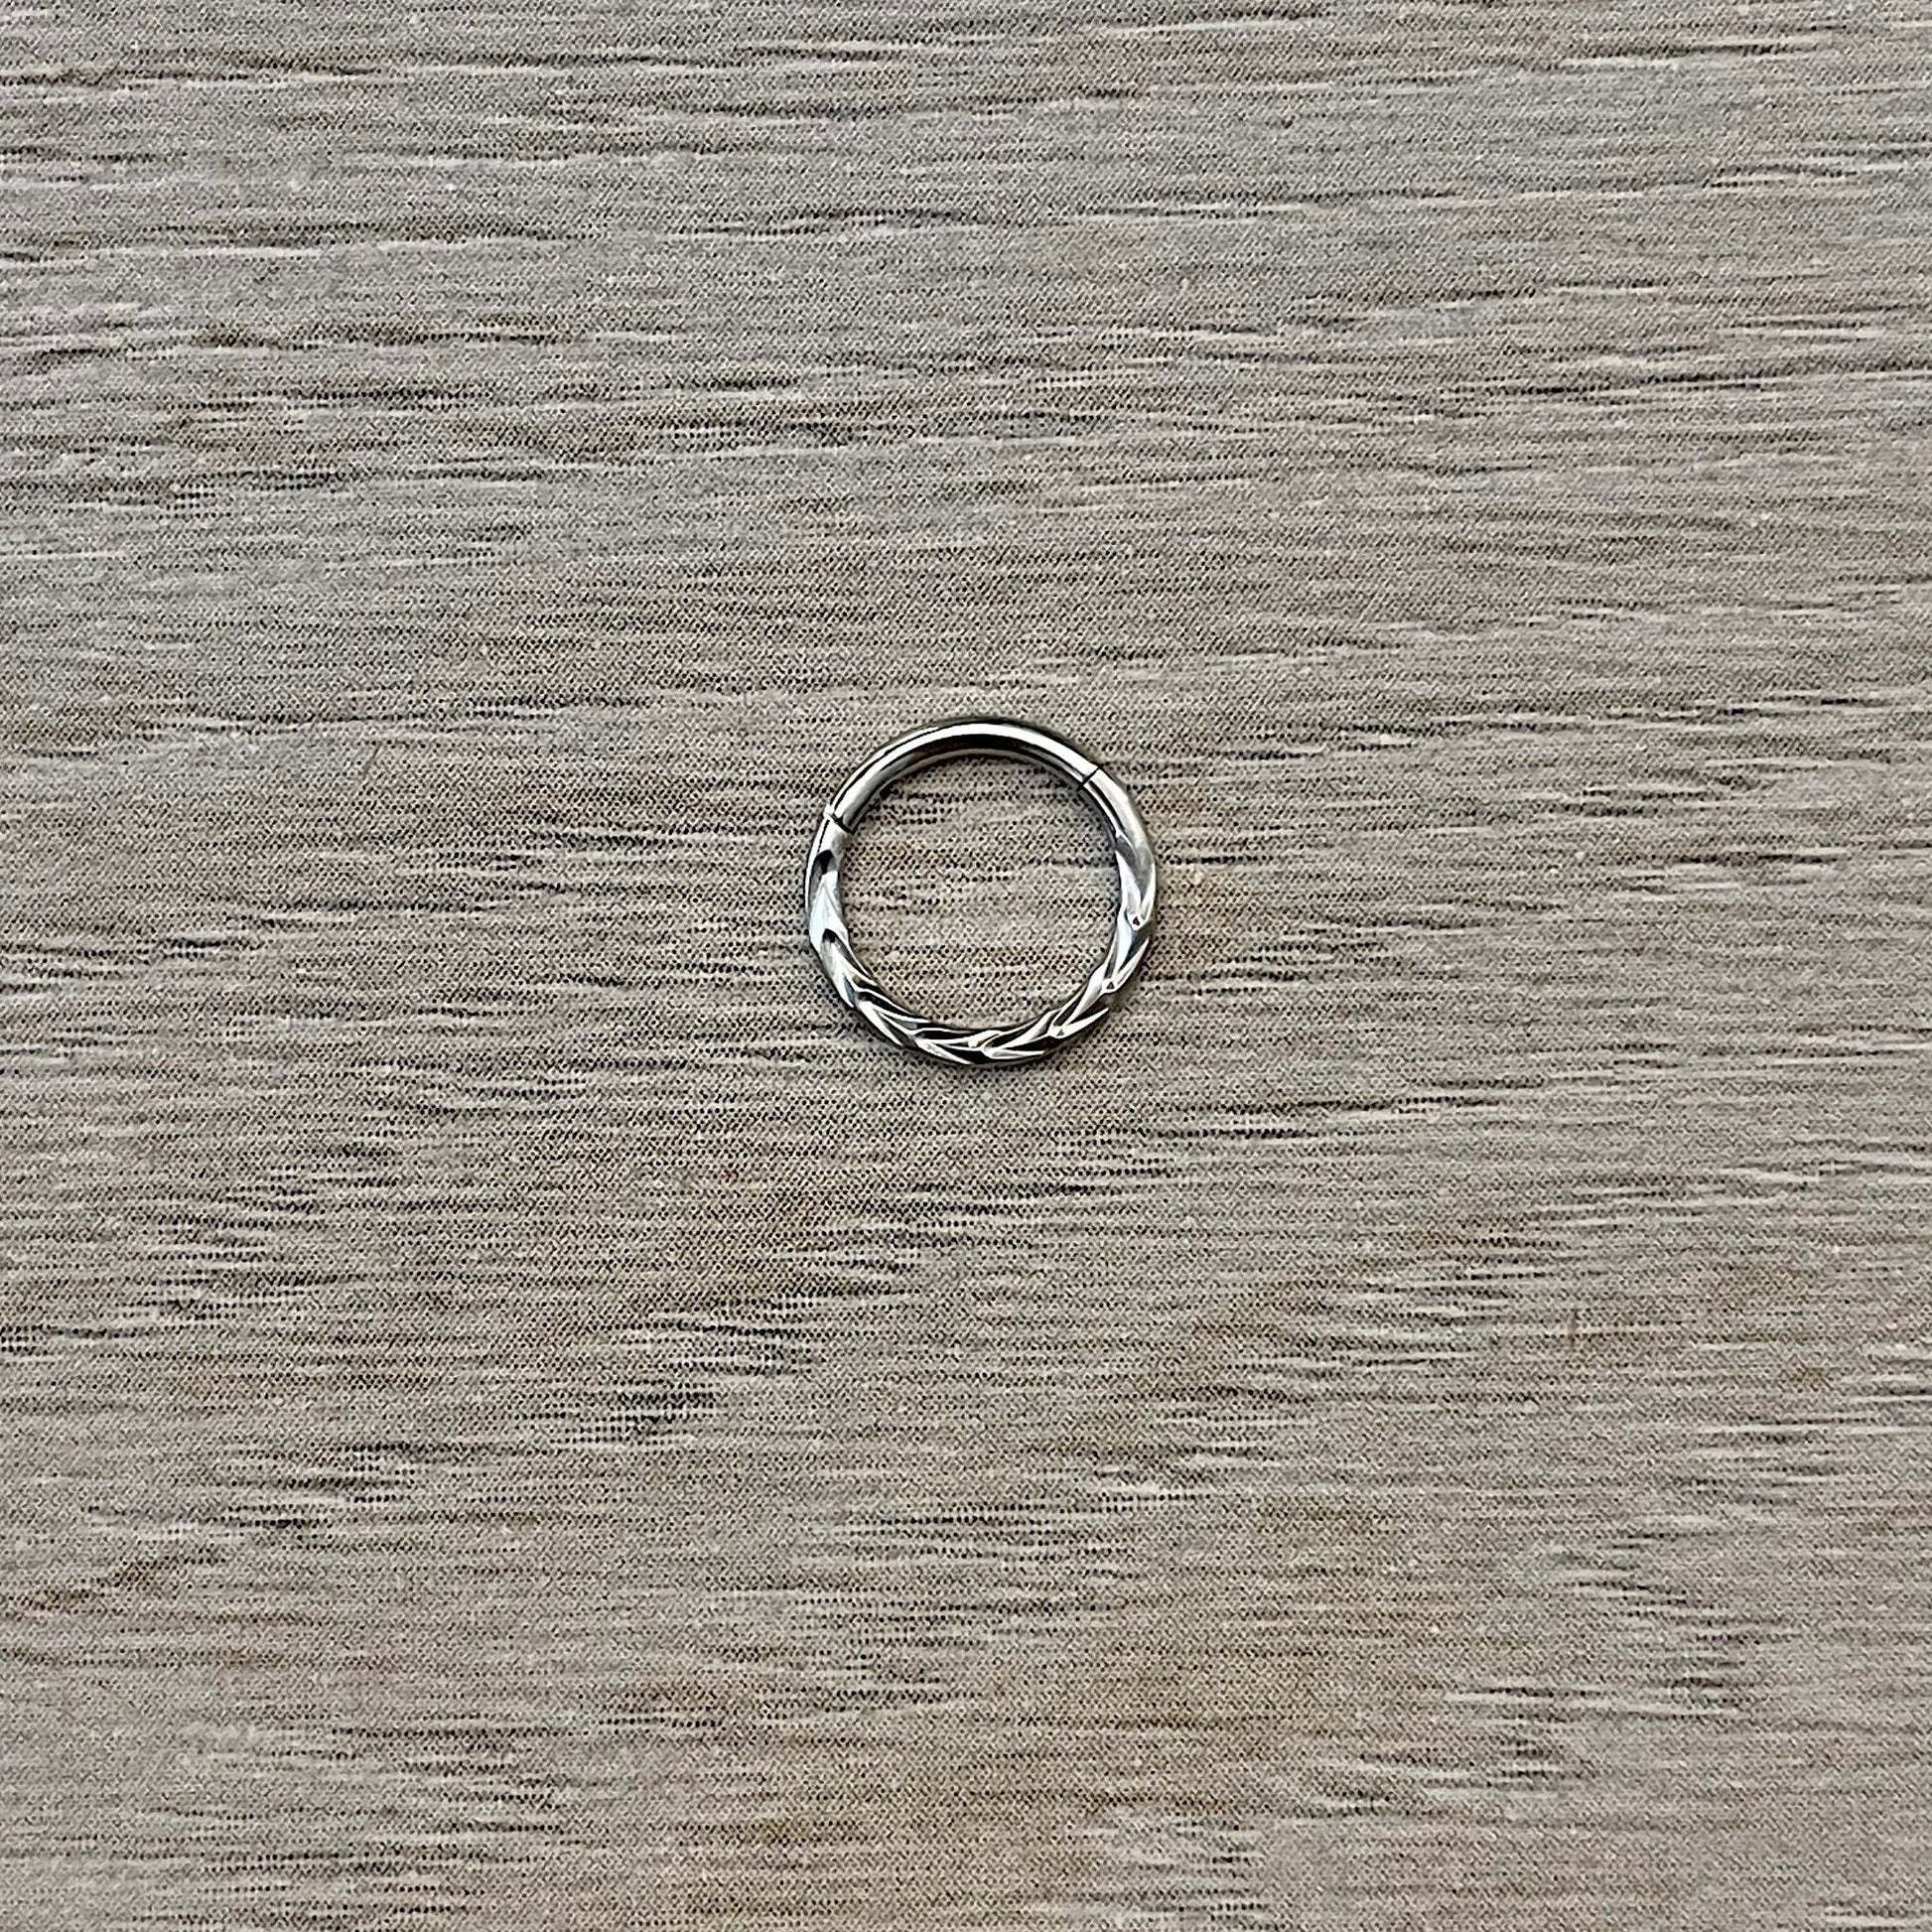 Silver Septum Piercing (16G | 6mm, 8mm or 10mm | Surgical Steel | Gold or Silver)